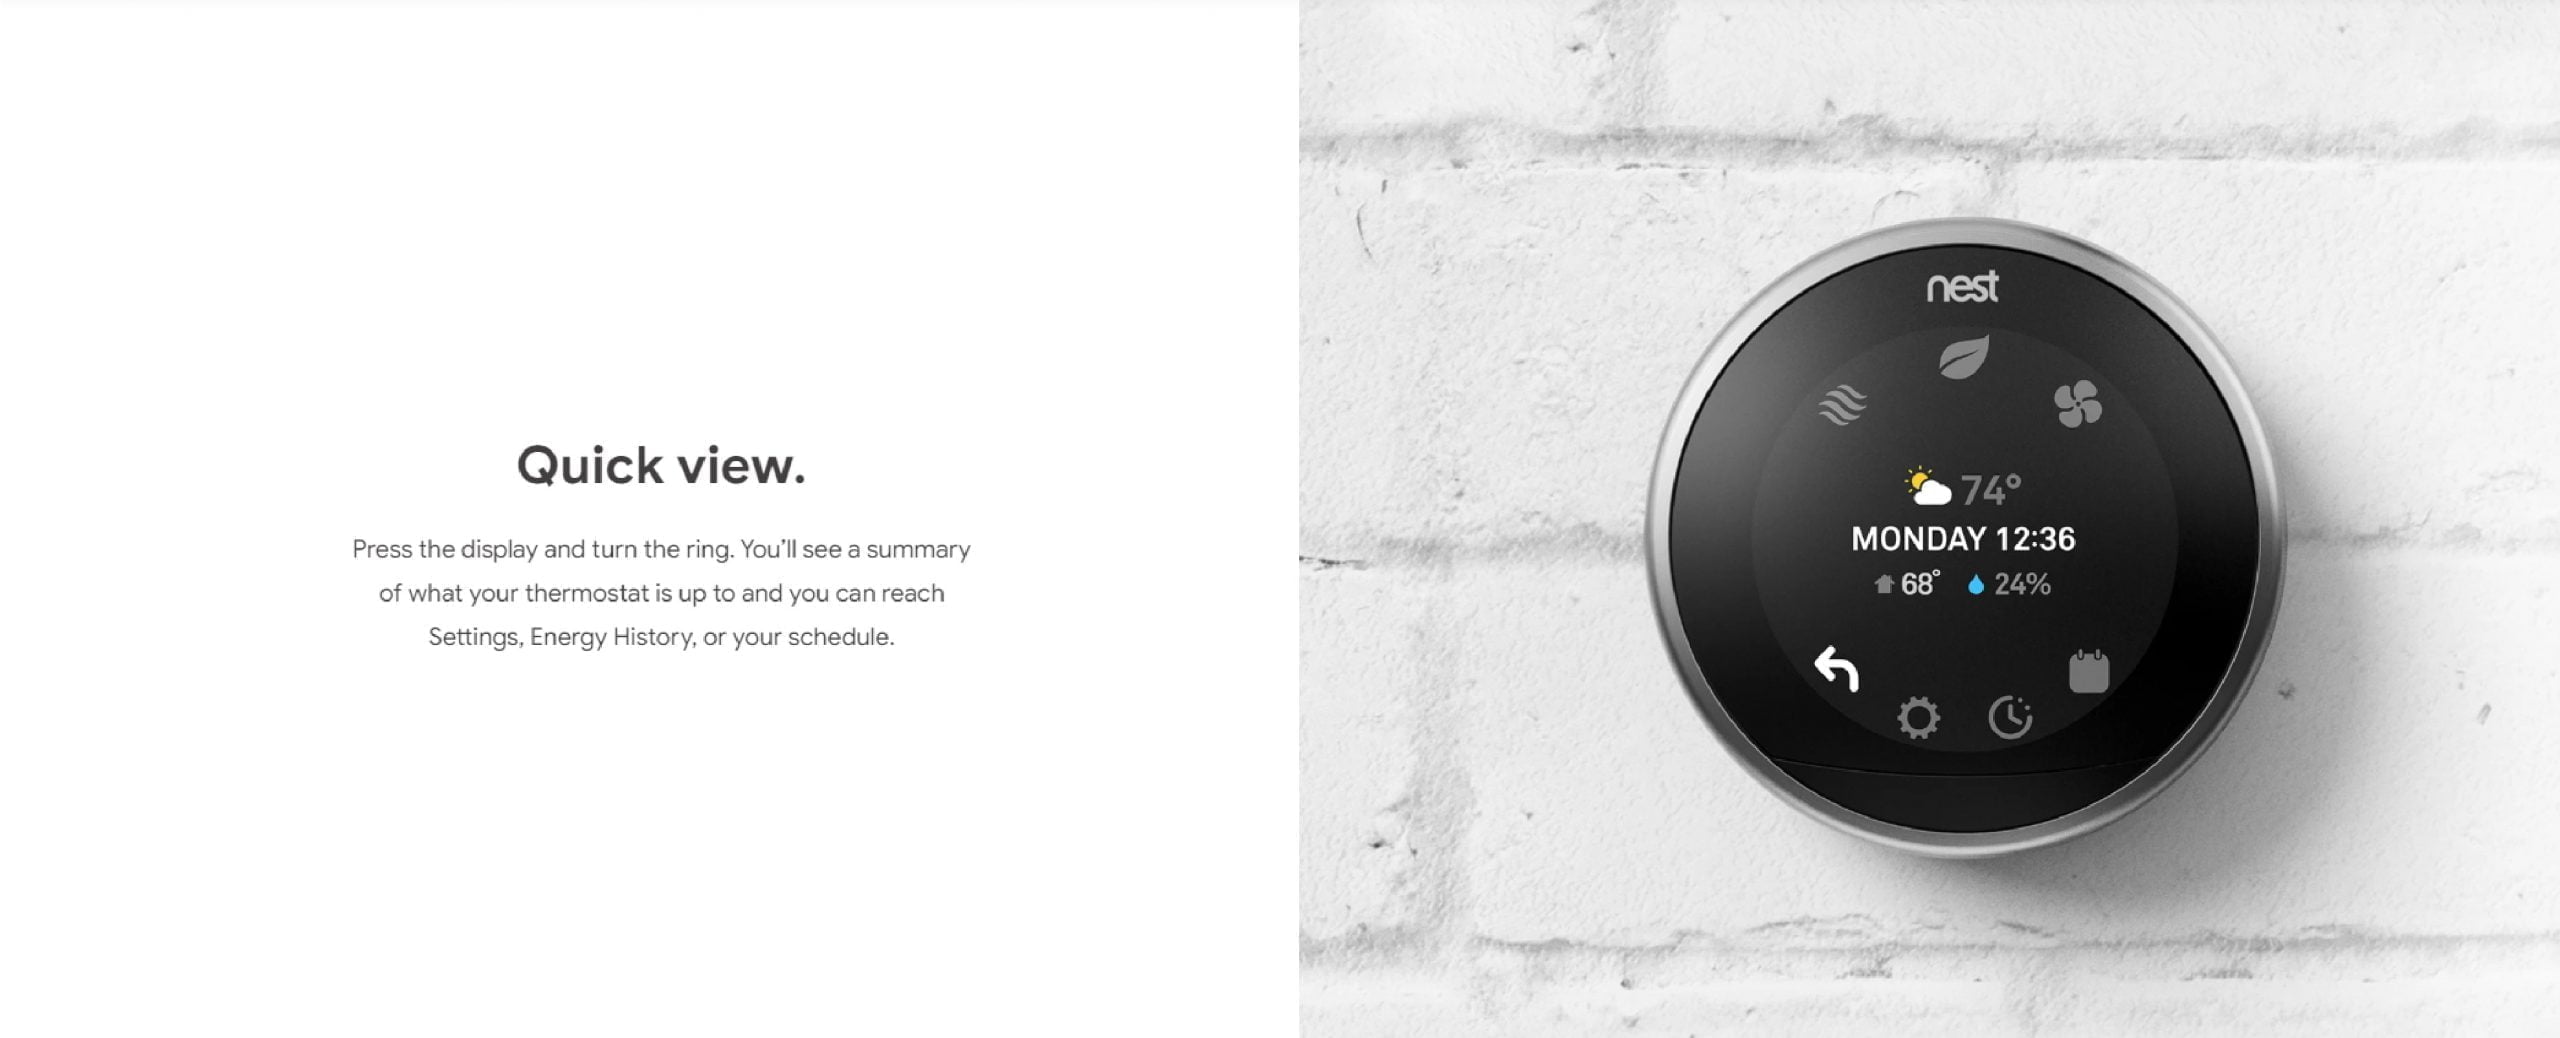 Nest 08 Scaled Google &Lt;H1&Gt;Google Nest Learning Smart Wifi Thermostat 3Rd Gen - T3019Us Polished Steel&Lt;/H1&Gt; &Lt;Ul Class=&Quot;A-Unordered-List A-Vertical A-Spacing-Mini&Quot;&Gt; &Lt;Li&Gt;&Lt;Span Class=&Quot;A-List-Item&Quot;&Gt;Auto-Schedule: No More Confusing Programming. It Learns The Temperatures You Like And Programs Itself.&Lt;/Span&Gt;&Lt;/Li&Gt; &Lt;Li&Gt;&Lt;Span Class=&Quot;A-List-Item&Quot;&Gt;Wi-Fi Thermostat: Connect The Nest Thermostat To Wi-Fi To Change The Temperature From Your Phone, Tablet Or Laptop.&Lt;/Span&Gt;&Lt;/Li&Gt; &Lt;Li&Gt;&Lt;Span Class=&Quot;A-List-Item&Quot;&Gt;Energy Saving: You’ll See The Nest Leaf When You Choose A Temperature That Saves Energy. It Guides You In The Right Direction.&Lt;/Span&Gt;&Lt;/Li&Gt; &Lt;Li&Gt;&Lt;Span Class=&Quot;A-List-Item&Quot;&Gt;Smart Thermostat: Early-On Nest Learns How Your Home Warms Up And Keeps An Eye On The Weather To Get You The Temperature You Want When You Want It.&Lt;/Span&Gt;&Lt;/Li&Gt; &Lt;Li&Gt;&Lt;Span Class=&Quot;A-List-Item&Quot;&Gt;Home/Away Assist: The Nest Thermostat Automatically Turns Itself Down When You’re Away To Avoid Heating Or Cooling An Empty Home.&Lt;/Span&Gt;&Lt;/Li&Gt; &Lt;Li&Gt;&Lt;Span Class=&Quot;A-List-Item&Quot;&Gt;Works With Amazon Alexa For Voice Control (Alexa Device Sold Separately)&Lt;/Span&Gt;&Lt;/Li&Gt; &Lt;Li&Gt;&Lt;Span Class=&Quot;A-List-Item&Quot;&Gt;&Lt;Span Class=&Quot;A-List-Item&Quot;&Gt;Auto-Schedule: Nest Learns The Temperatures You Like And Programs Itself In About A Week.&Lt;/Span&Gt;&Lt;/Span&Gt; &Lt;H5&Gt;Note : Direct Replacement Warranty One Year&Lt;/H5&Gt; &Lt;Div Class=&Quot;Html-Fragment&Quot;&Gt; &Lt;Div&Gt; &Lt;B&Gt;We Also Provide International Wholesale And Retail Shipping To All Gcc Countries: Saudi Arabia, Qatar, Oman, Kuwait, Bahrain.&Lt;/B&Gt; &Lt;/Div&Gt; &Lt;/Div&Gt;&Lt;/Li&Gt; &Lt;/Ul&Gt; &Lt;Div Class=&Quot;A-Row A-Expander-Container A-Expander-Inline-Container&Quot; Aria-Live=&Quot;Polite&Quot;&Gt; &Lt;Div Class=&Quot;A-Expander-Content A-Expander-Extend-Content A-Expander-Content-Expanded&Quot; Aria-Expanded=&Quot;True&Quot;&Gt;&Lt;/Div&Gt; &Lt;/Div&Gt; Google Nest Google Nest Learning Smart Wifi Thermostat 3Rd Gen - T3019Us Polished Steel